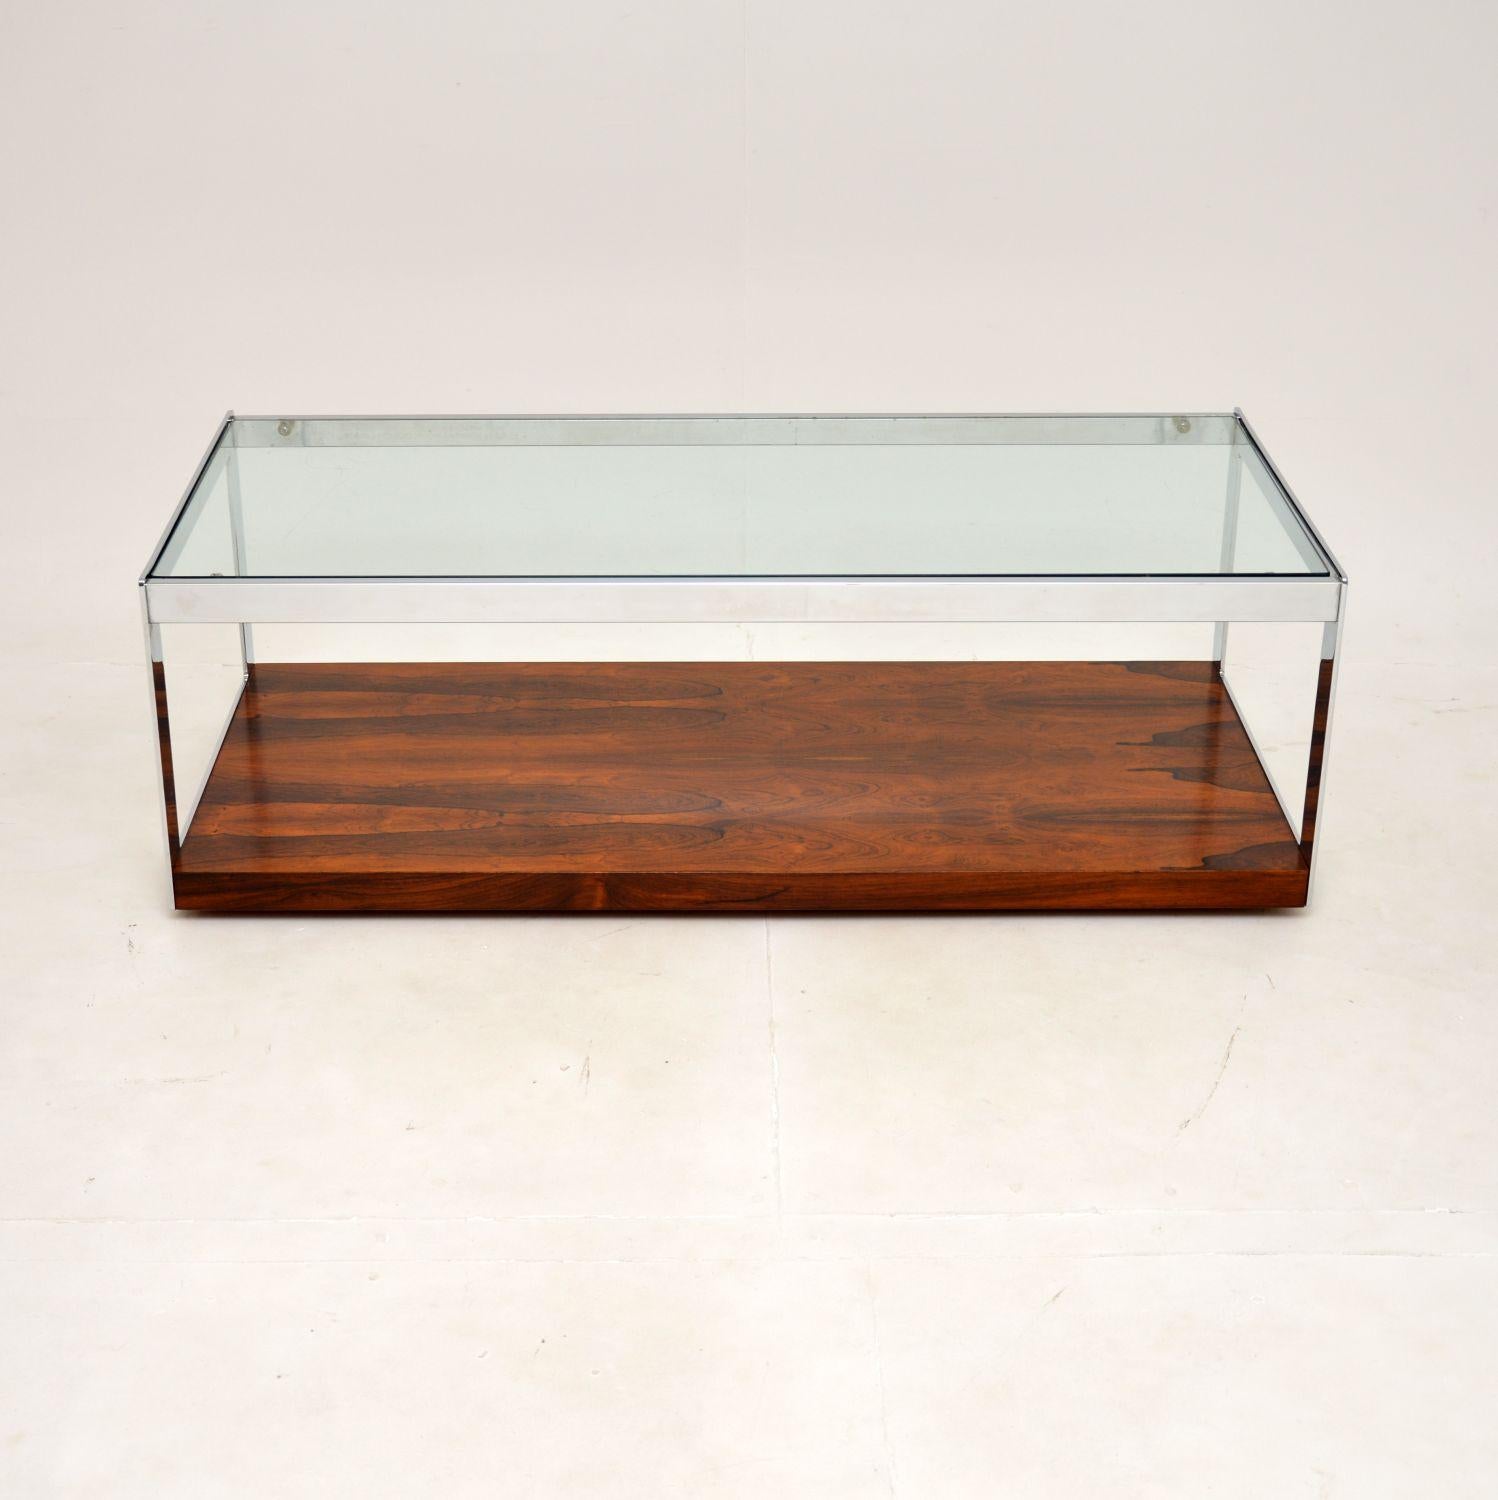 A very stylish and iconic vintage coffee table by Merrow Associates. This was made in England, it was designed by Richard Young and it dates from the early 1970’s.

The quality is superb, this is a great size with a useful lower tier for storage.